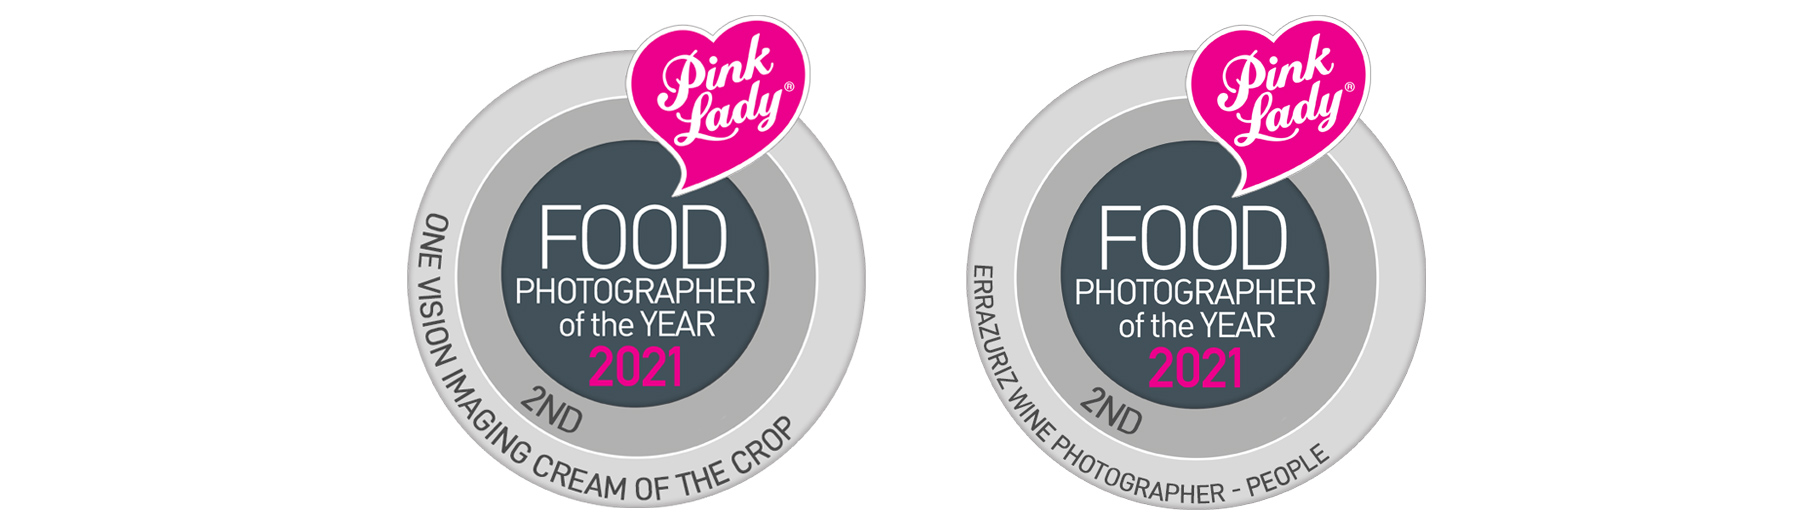 Pink Lady Food Photographer of the Year 2021・Second Place・Manja Wachsmuth